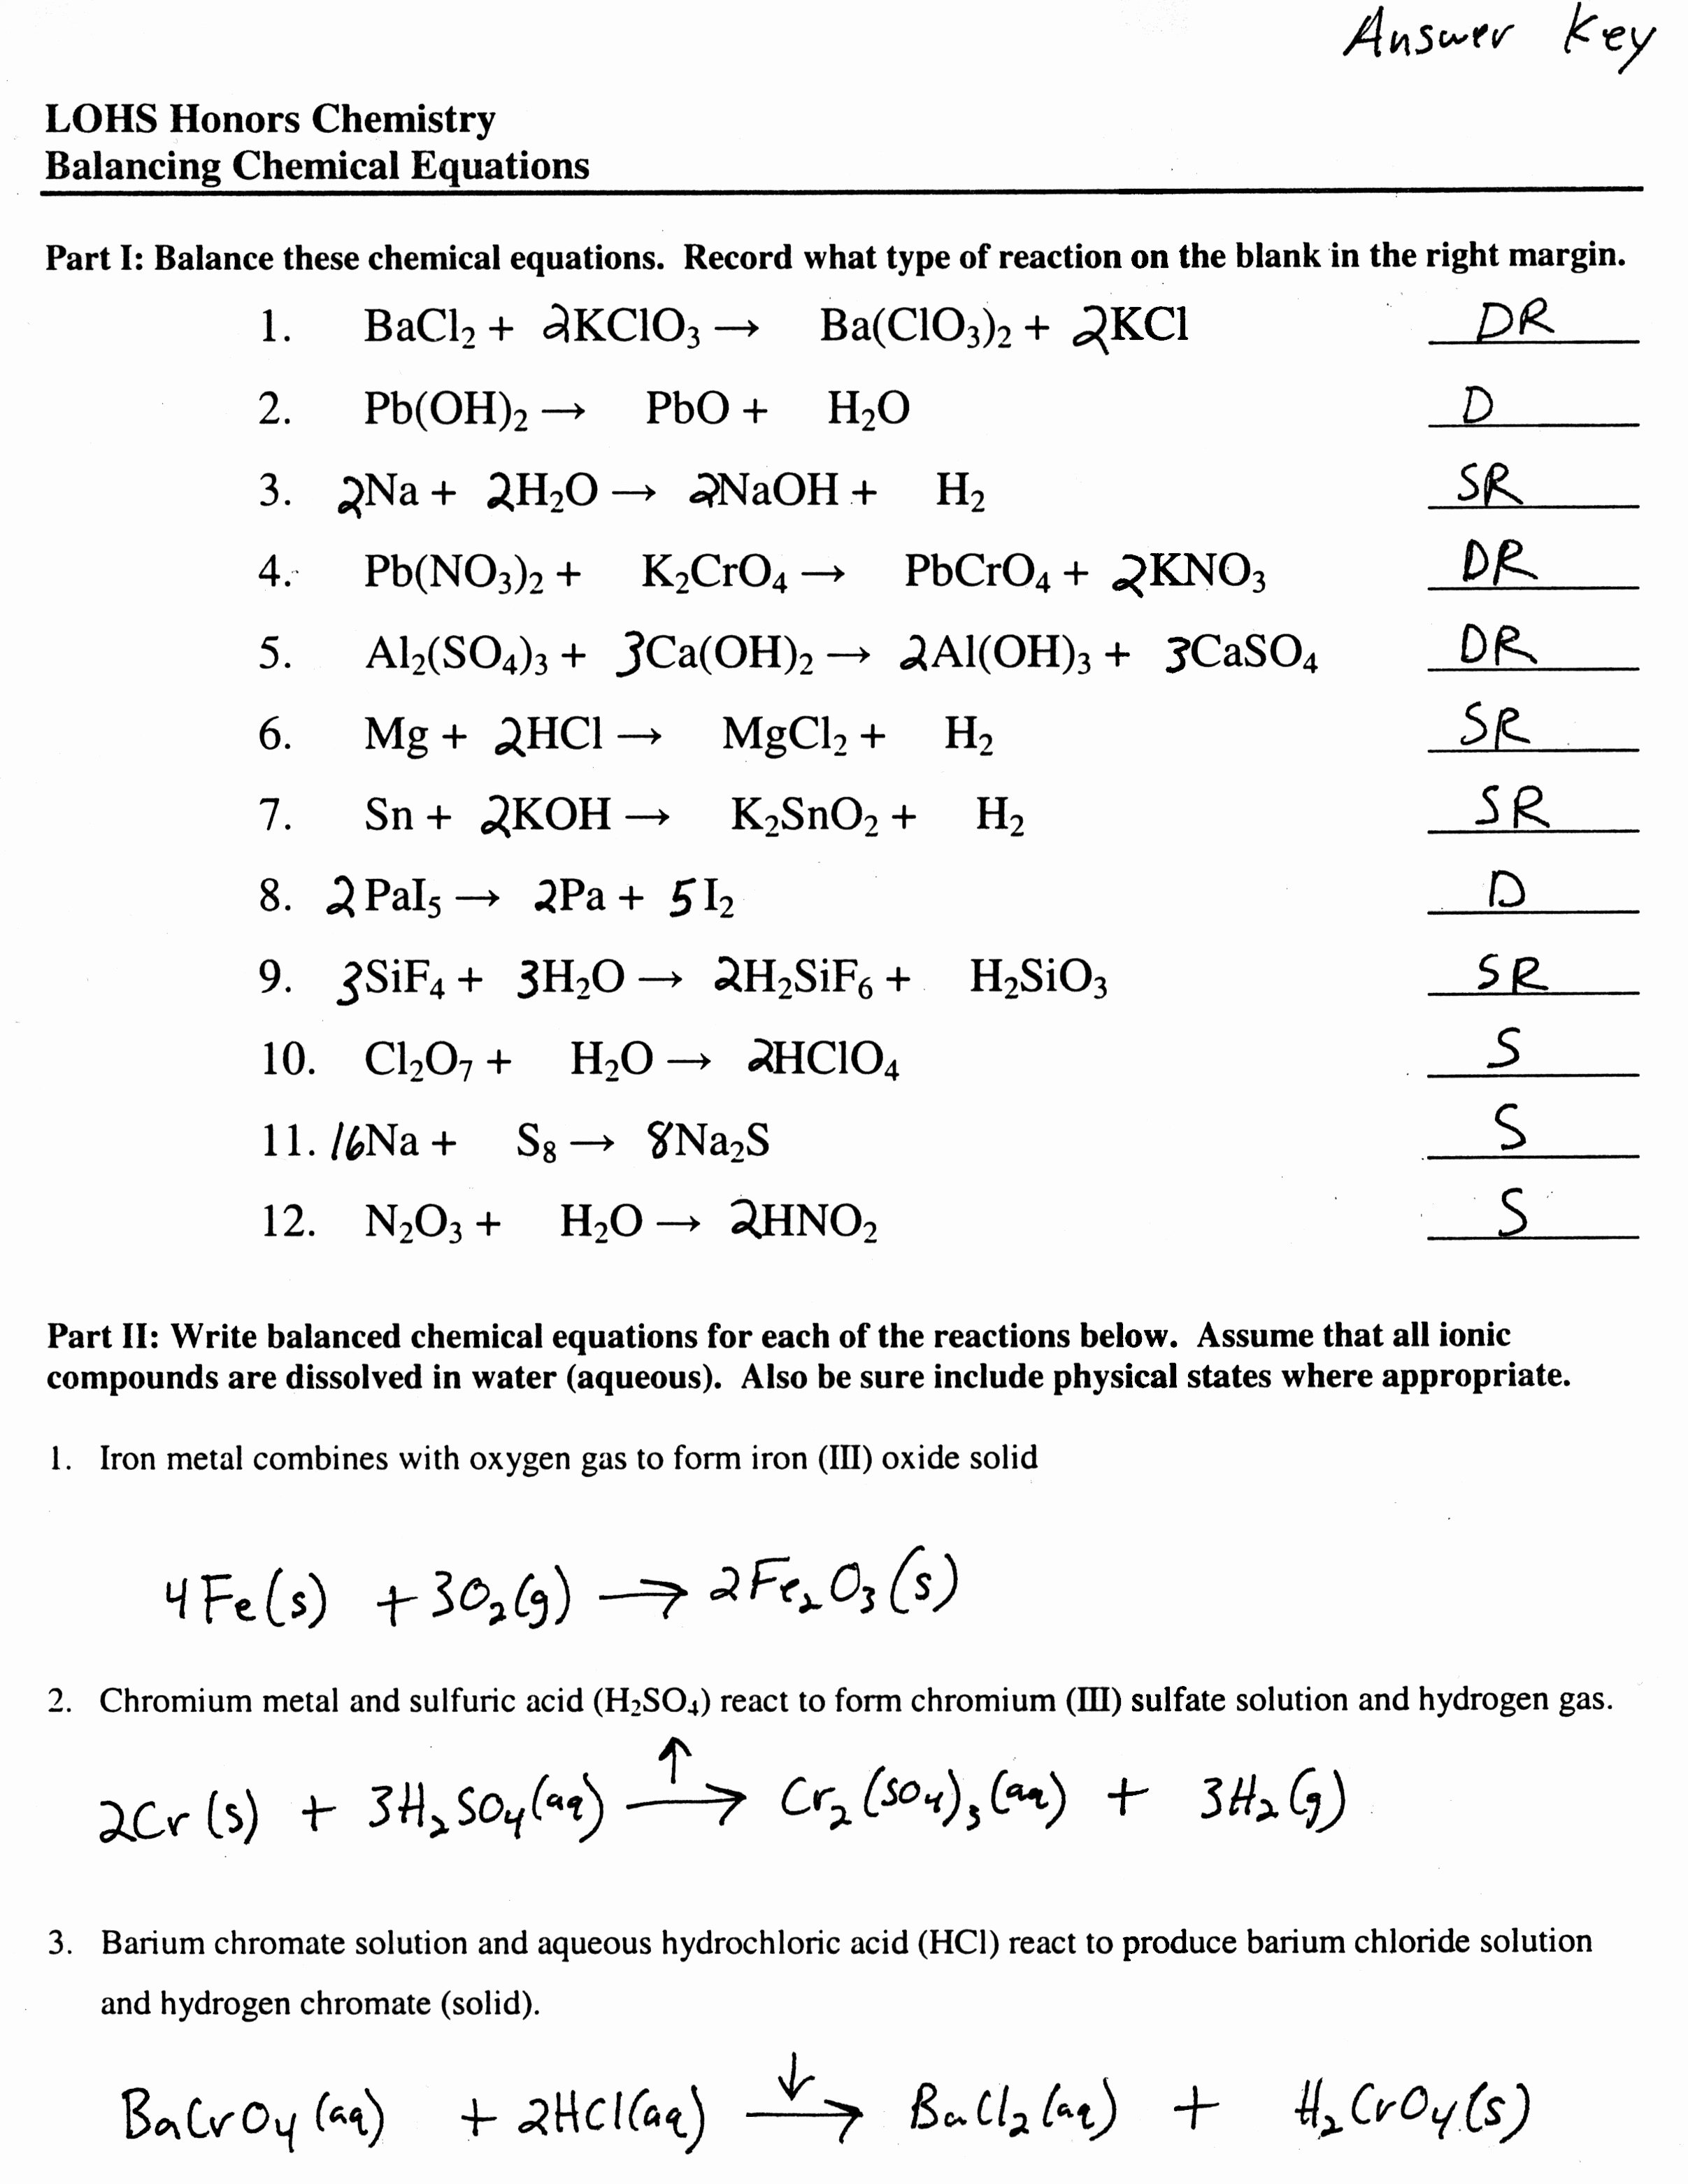 Worksheet Balancing Equations Answers Lovely Balancing Equations Worksheet Health and Fitness Training